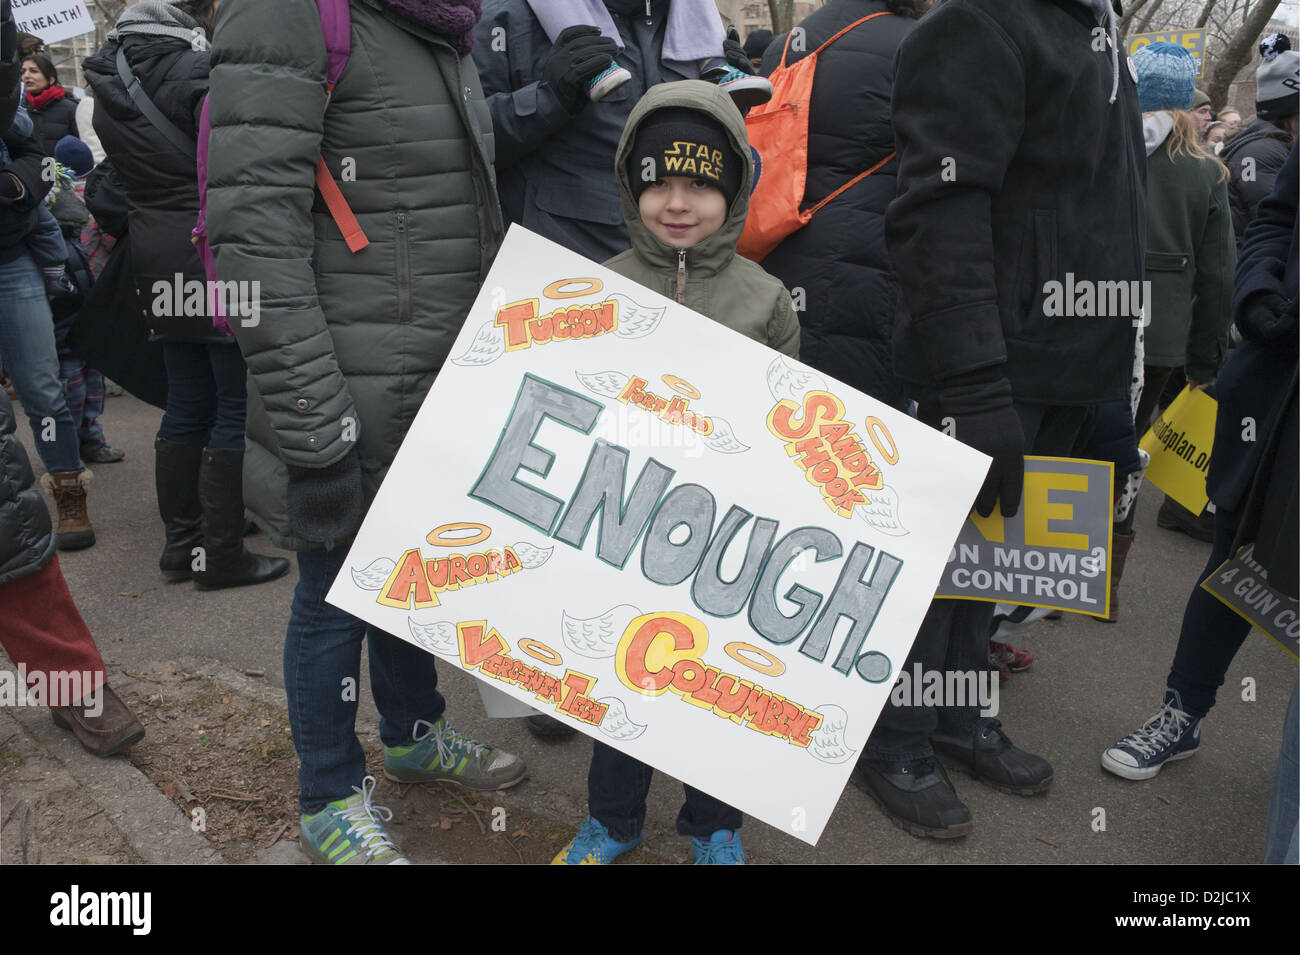 One Million Moms for Gun Control demonstration in NYC on January 21, 2013 to call for stricter gun and ammunition regulations. Stock Photo